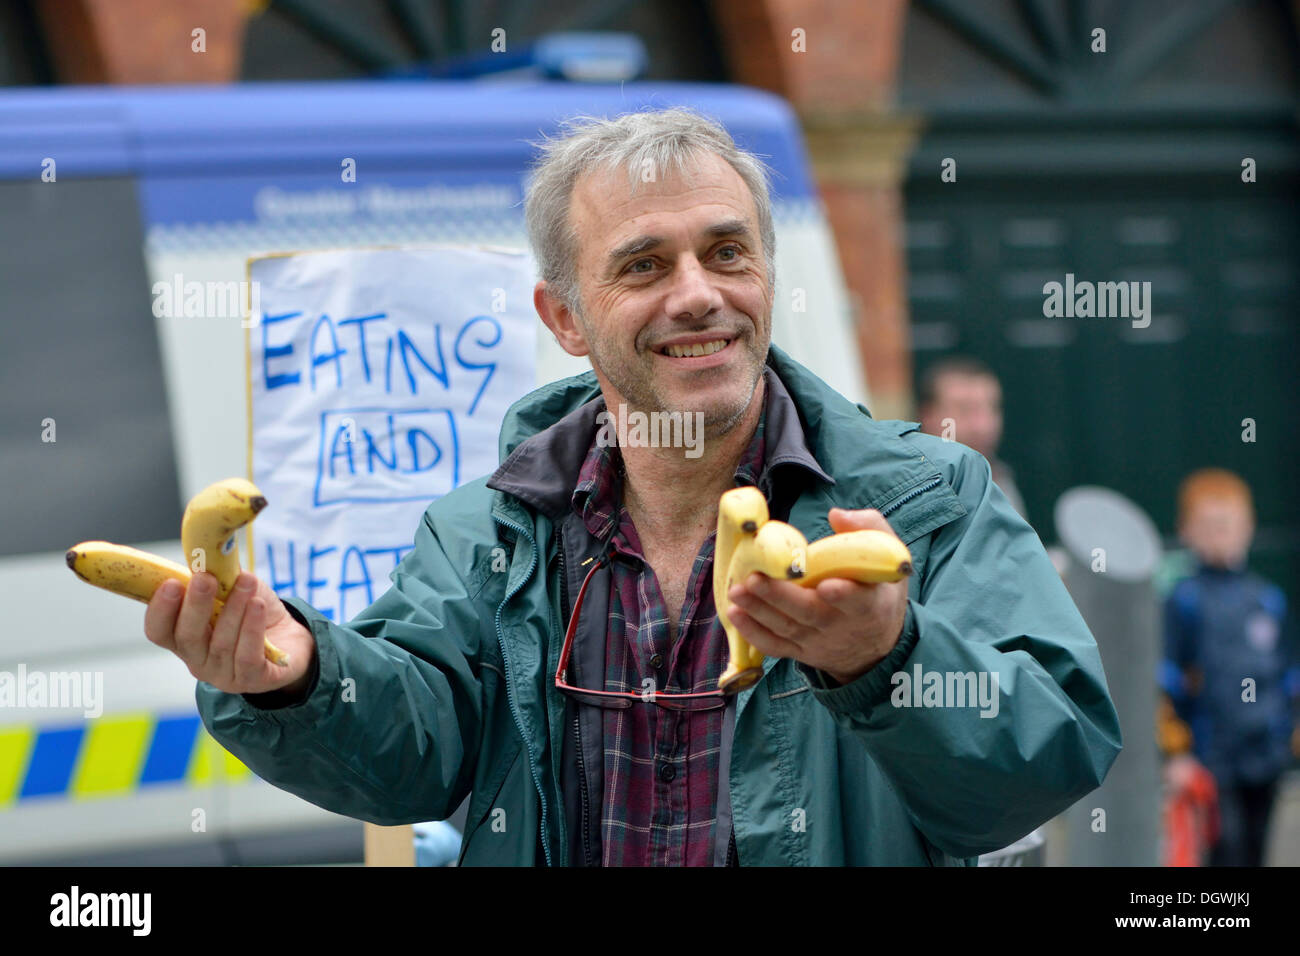 Manchester, UK. 26th Oct, 2013. A protester hands out bananas to show the displeasure of a small anti-Coalition Government group protesting against the bedroom tax and government measures, which are making the life of the ordinary citizen worse than before.  Credit:  John Fryer/Alamy Live News Stock Photo